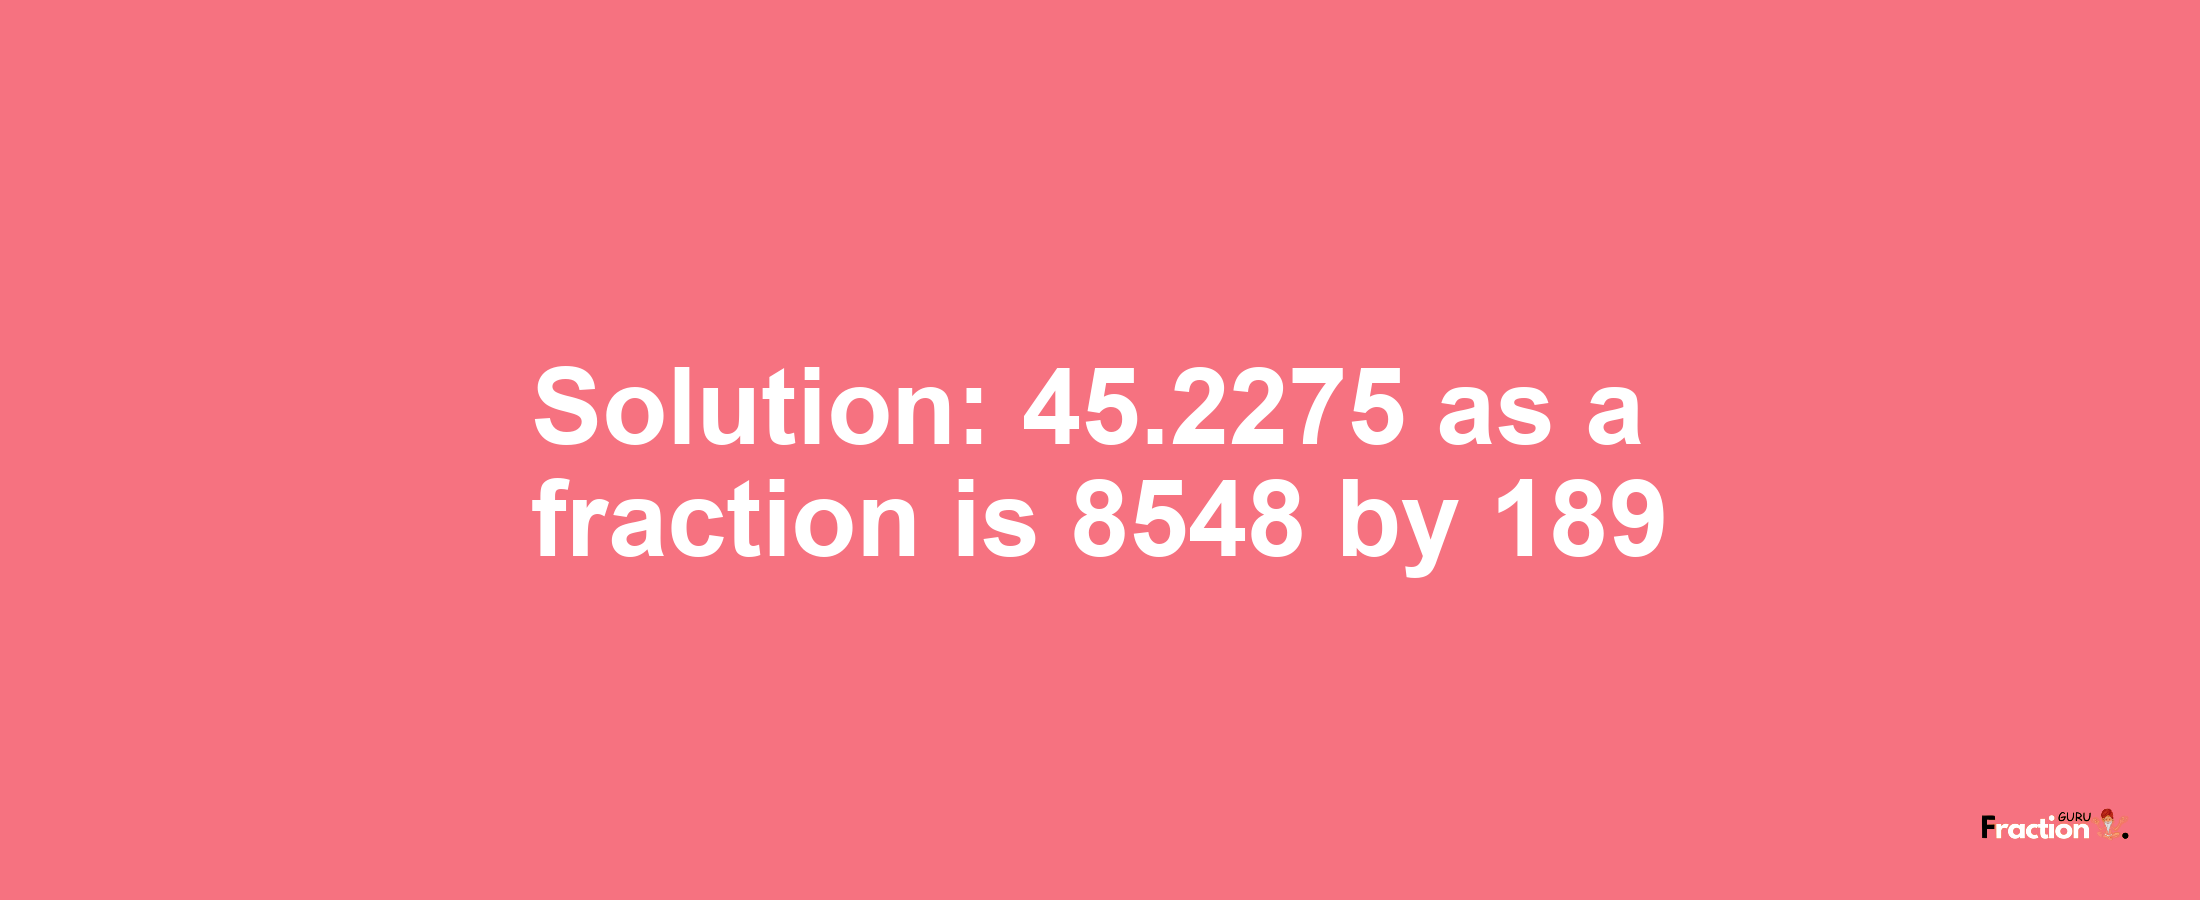 Solution:45.2275 as a fraction is 8548/189